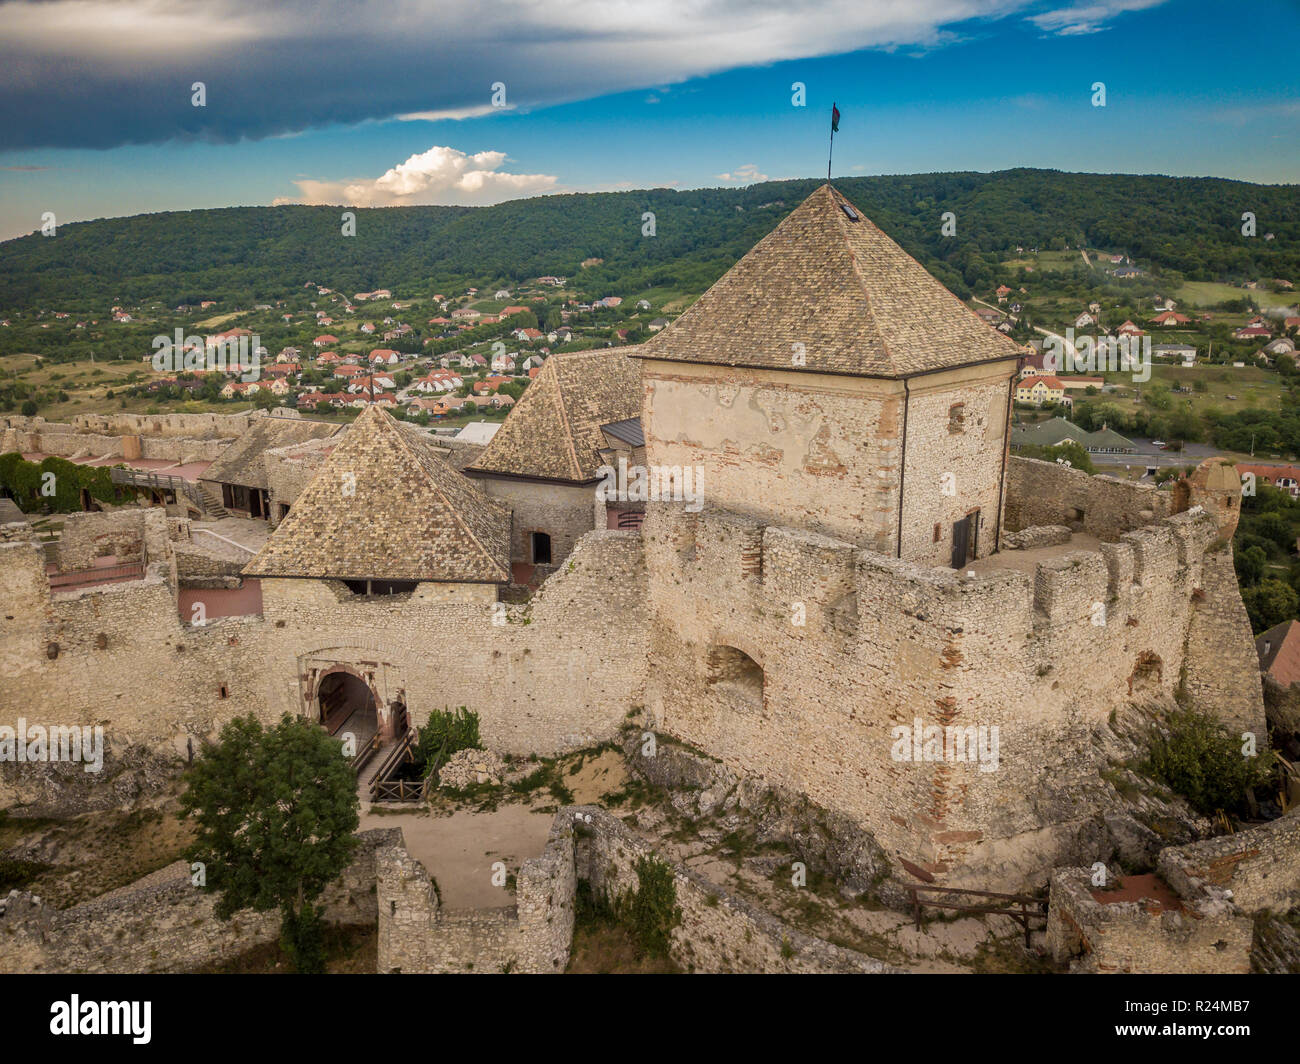 Aerial panorama of famous medieval castle ruin in Sumeg Hungary near the Lake Balaton partially restored with donjon, bastions, gate house, loop holes Stock Photo